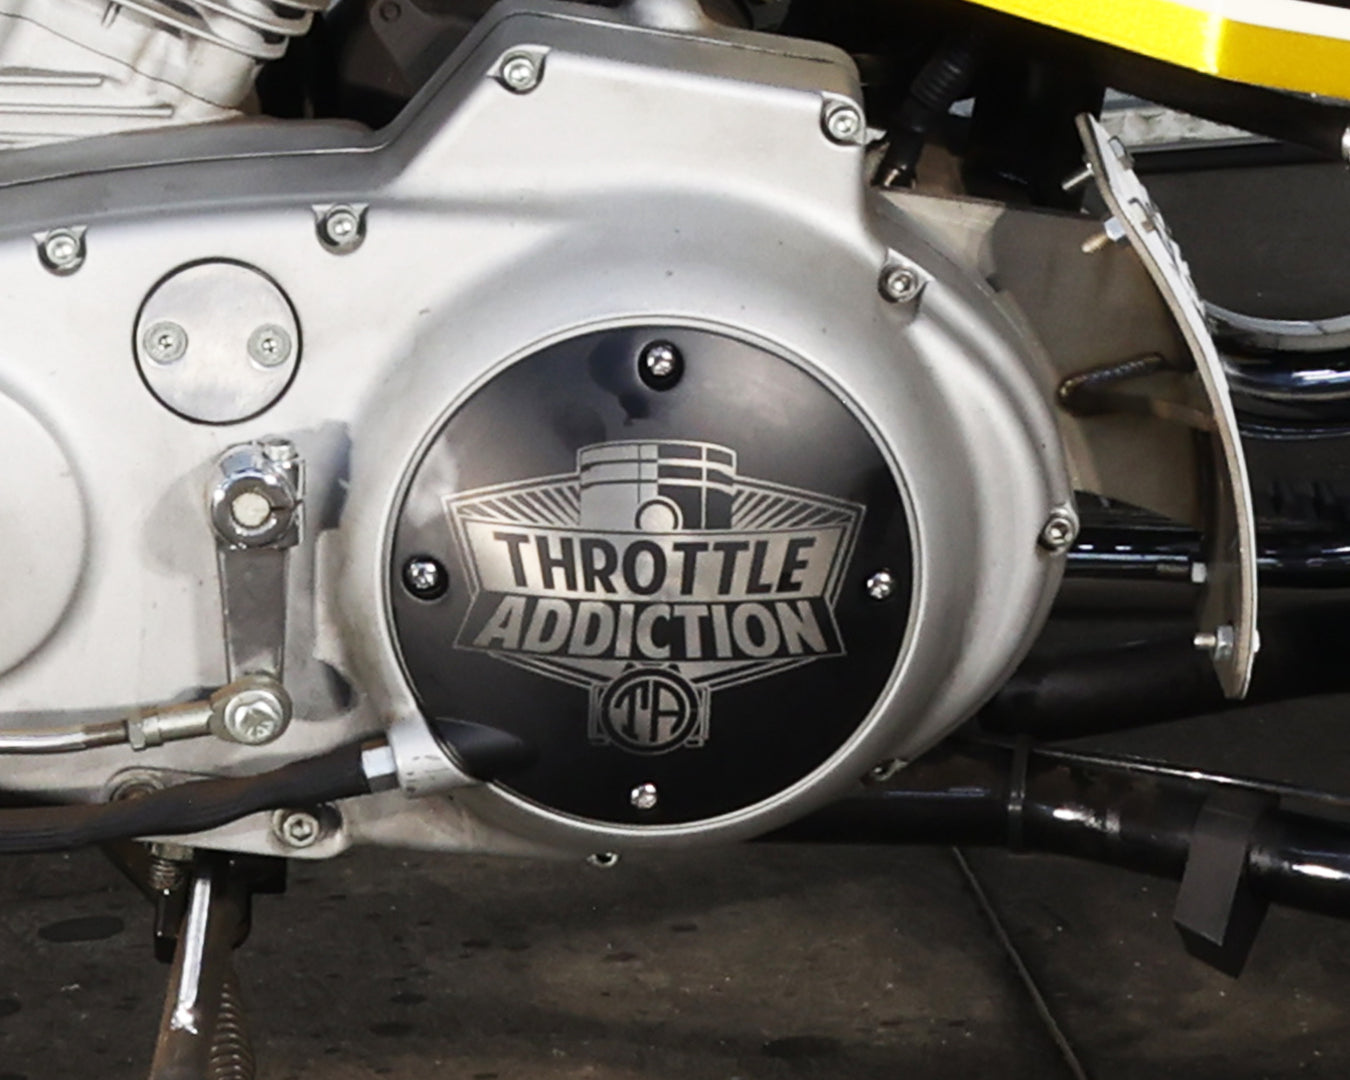 Close up photo of Derby Cover on Sportster Motorcycle